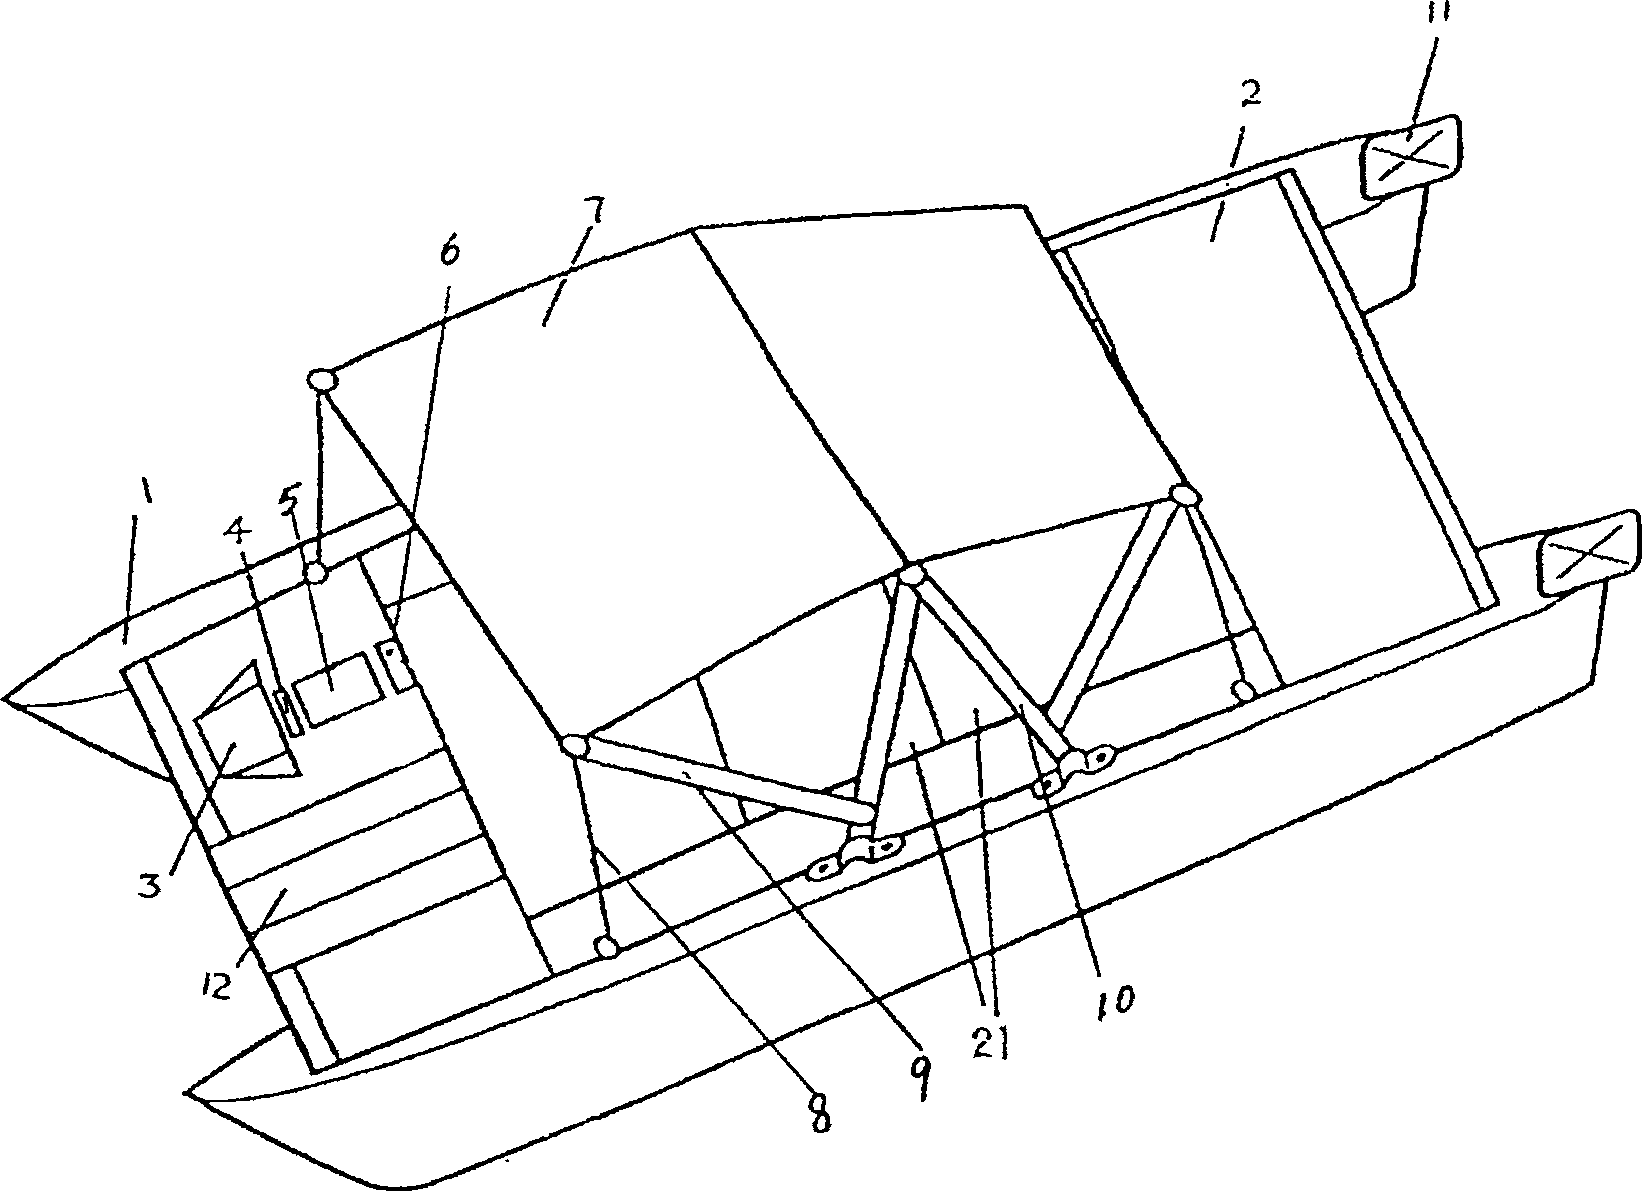 A multi-purpose catamaran and a method for building it using the means of tier